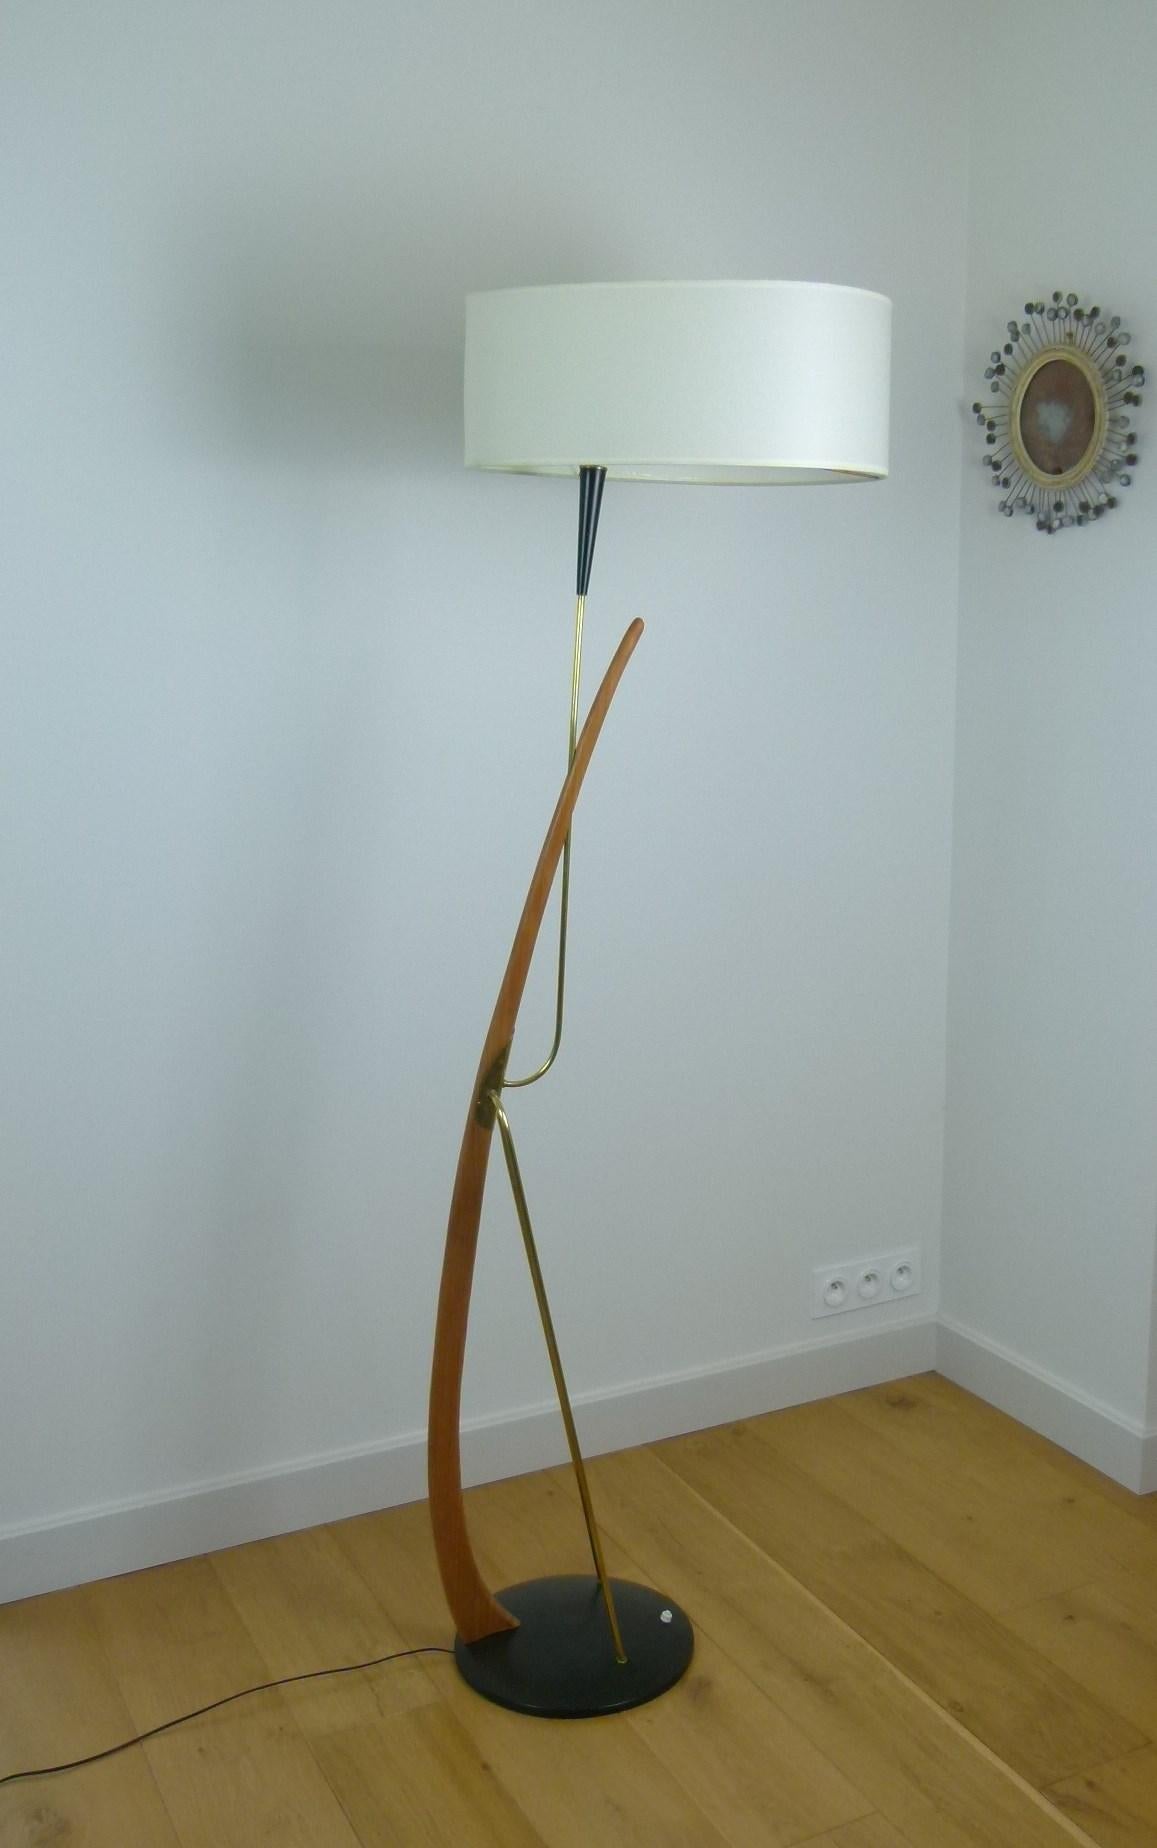 Floor lamp in wood and brass,
Circular base in black lacquered metal,
Brass light arm, supported by an arched wooden arm.
oval shade,
French work, circa 1950
Electricity redone to EU standards shade redone to the model.
Perfect condition.
  